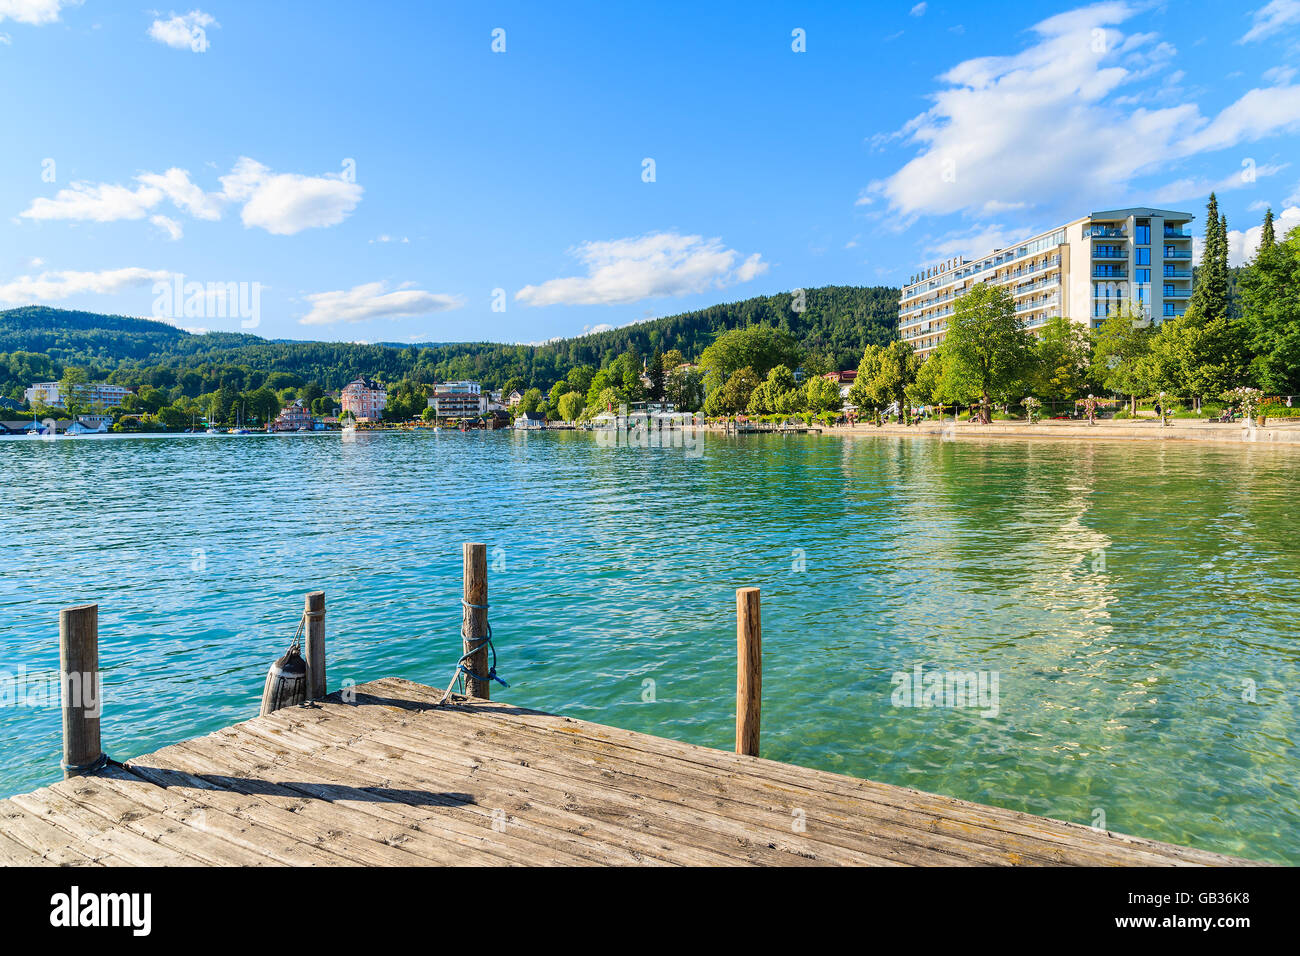 WORTHERSEE LAKE, AUSTRIA - JUN 20, 2015: wooden pier and hotel building along Worthersee lake shore in summer season. Stock Photo